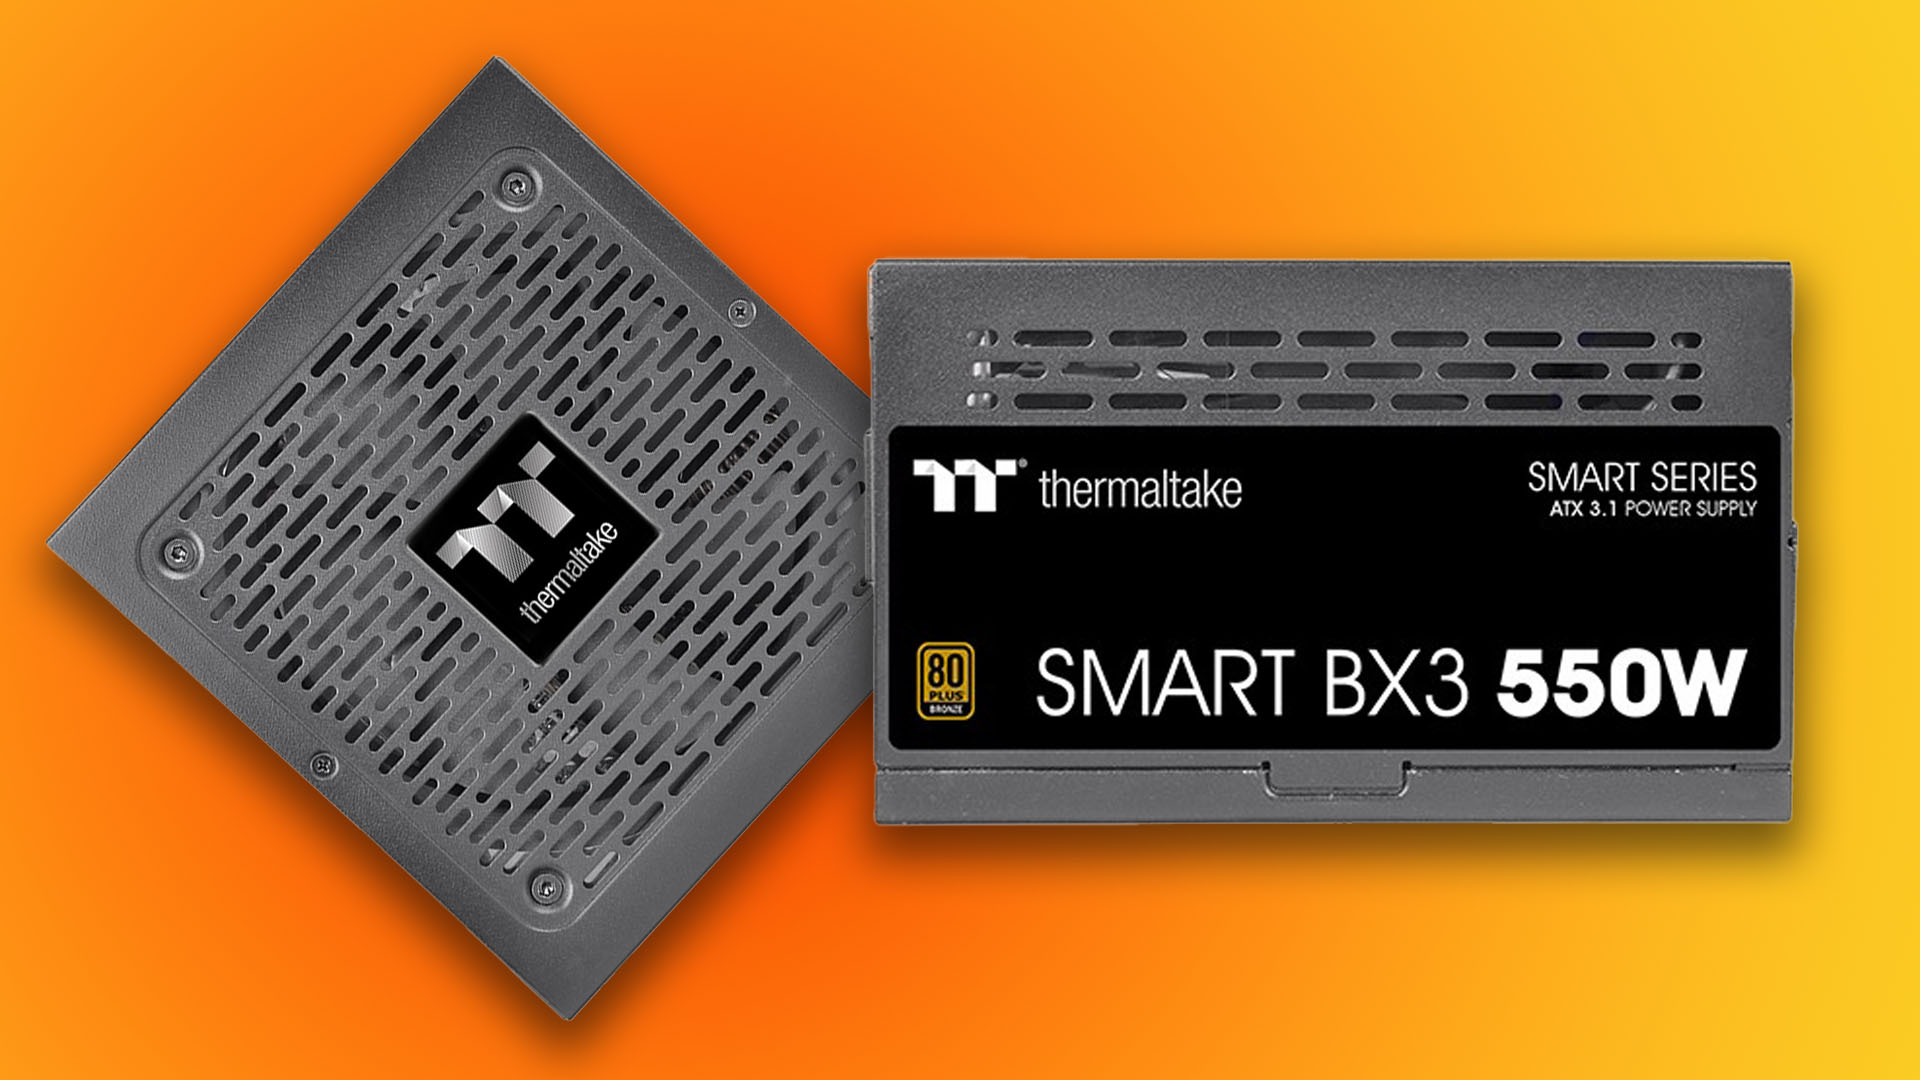 ATX 3.1 is the future of PSUs and Thermaltake's new one costs just $49